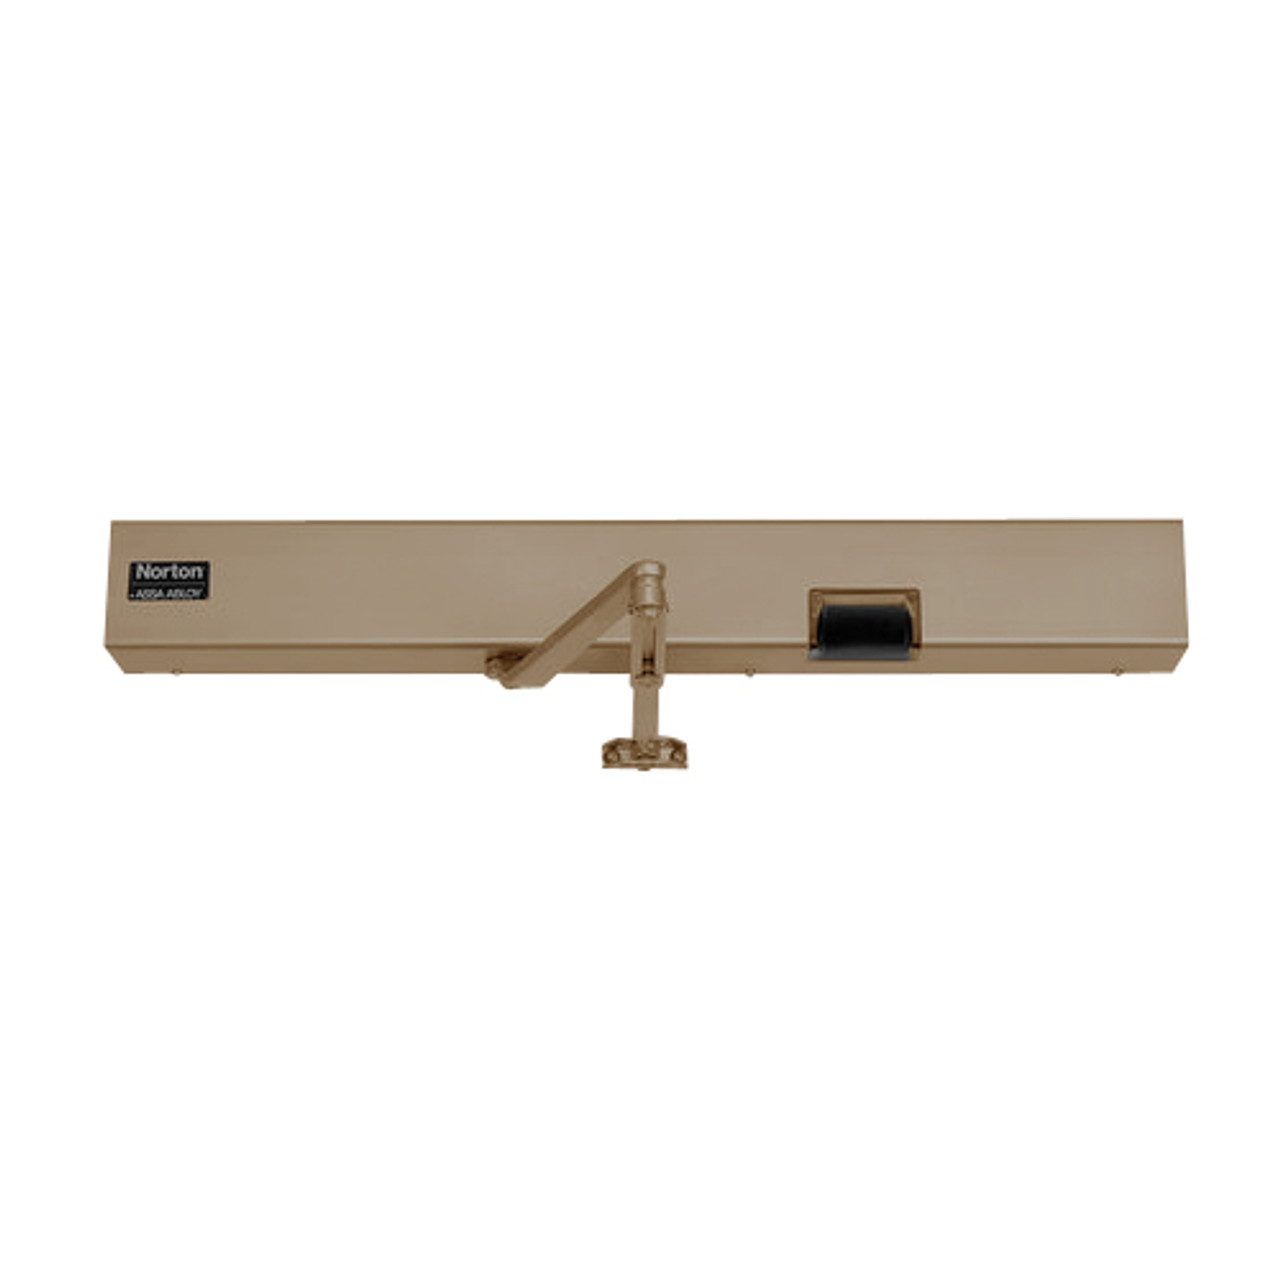 7132SZ-LH-24VDC-691 Norton 7100SZ Series Safe Zone Multi-Point Closer/Holder with Motion Sensor and Push Side Double Lever 13-1/2 inch Main Arm in Dull Bronze Finish